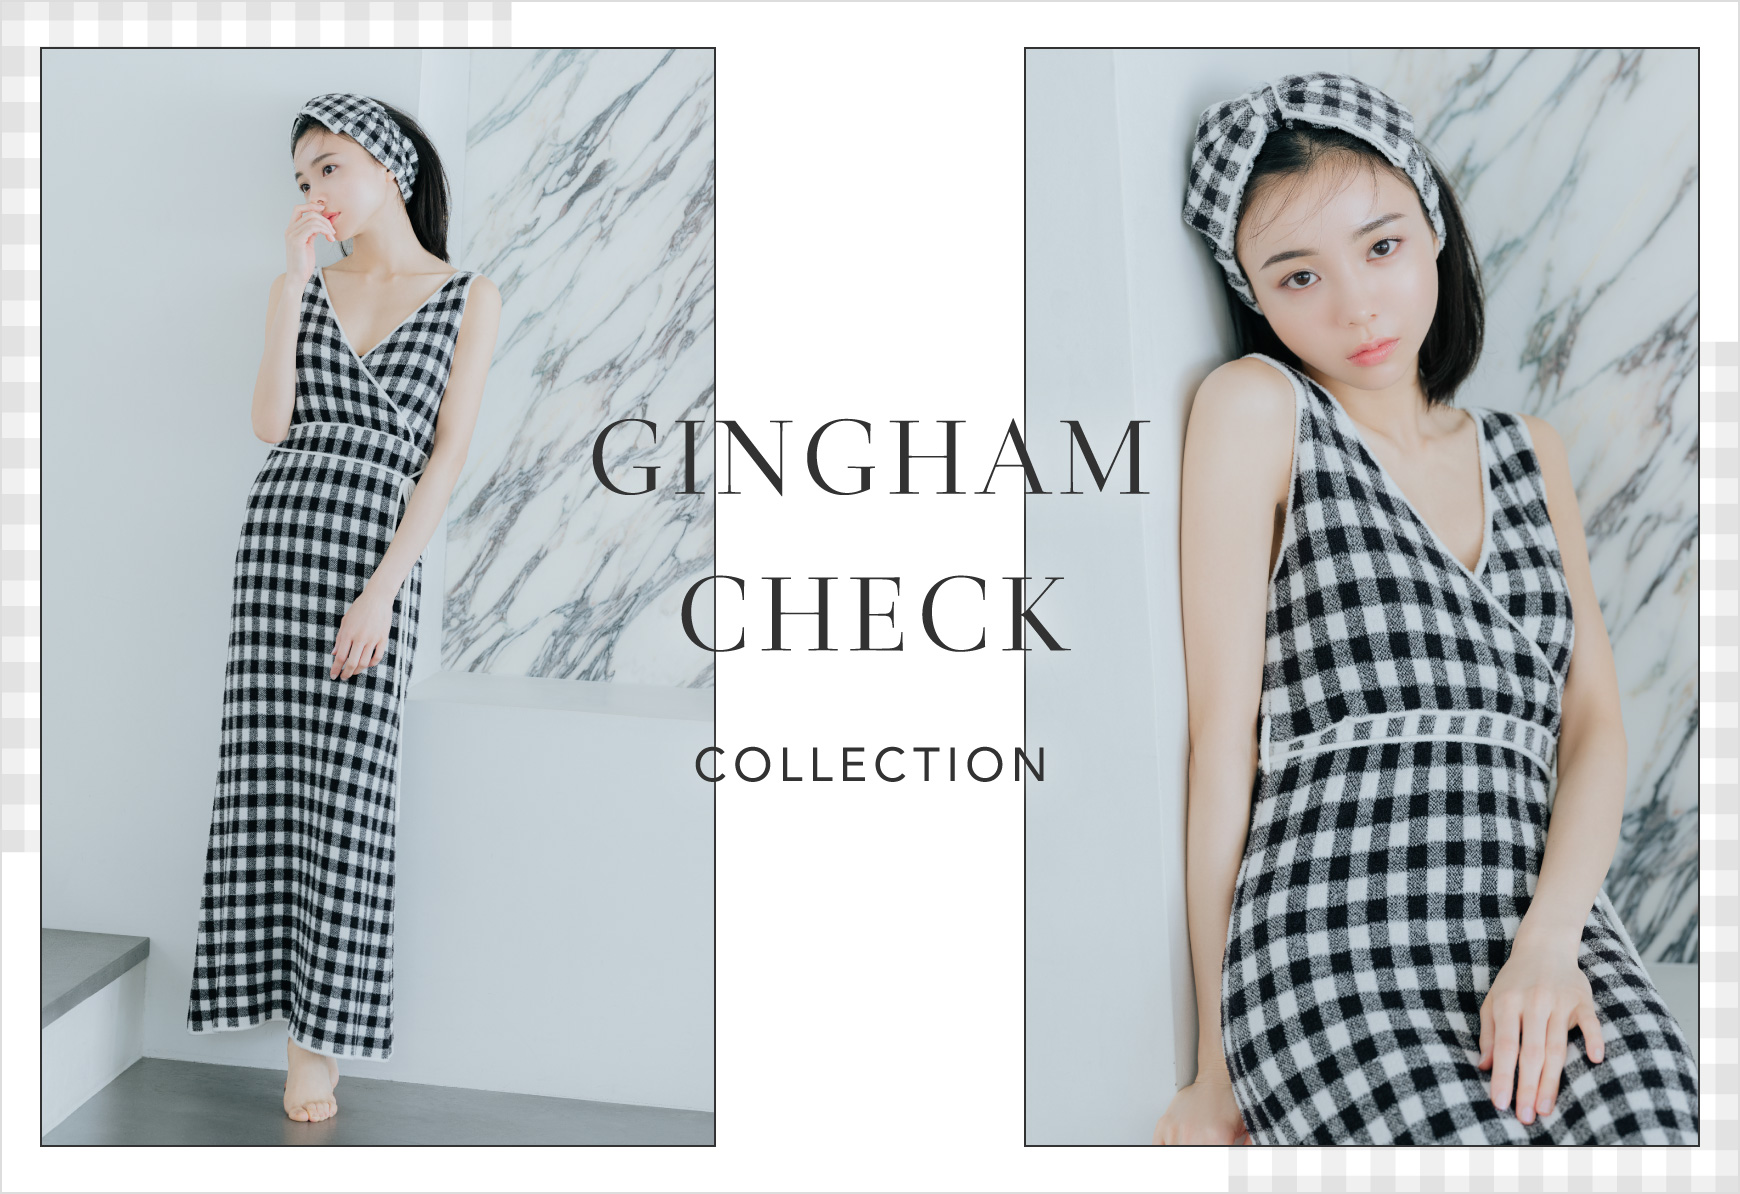 GINGHAM CHECK COLLECTION